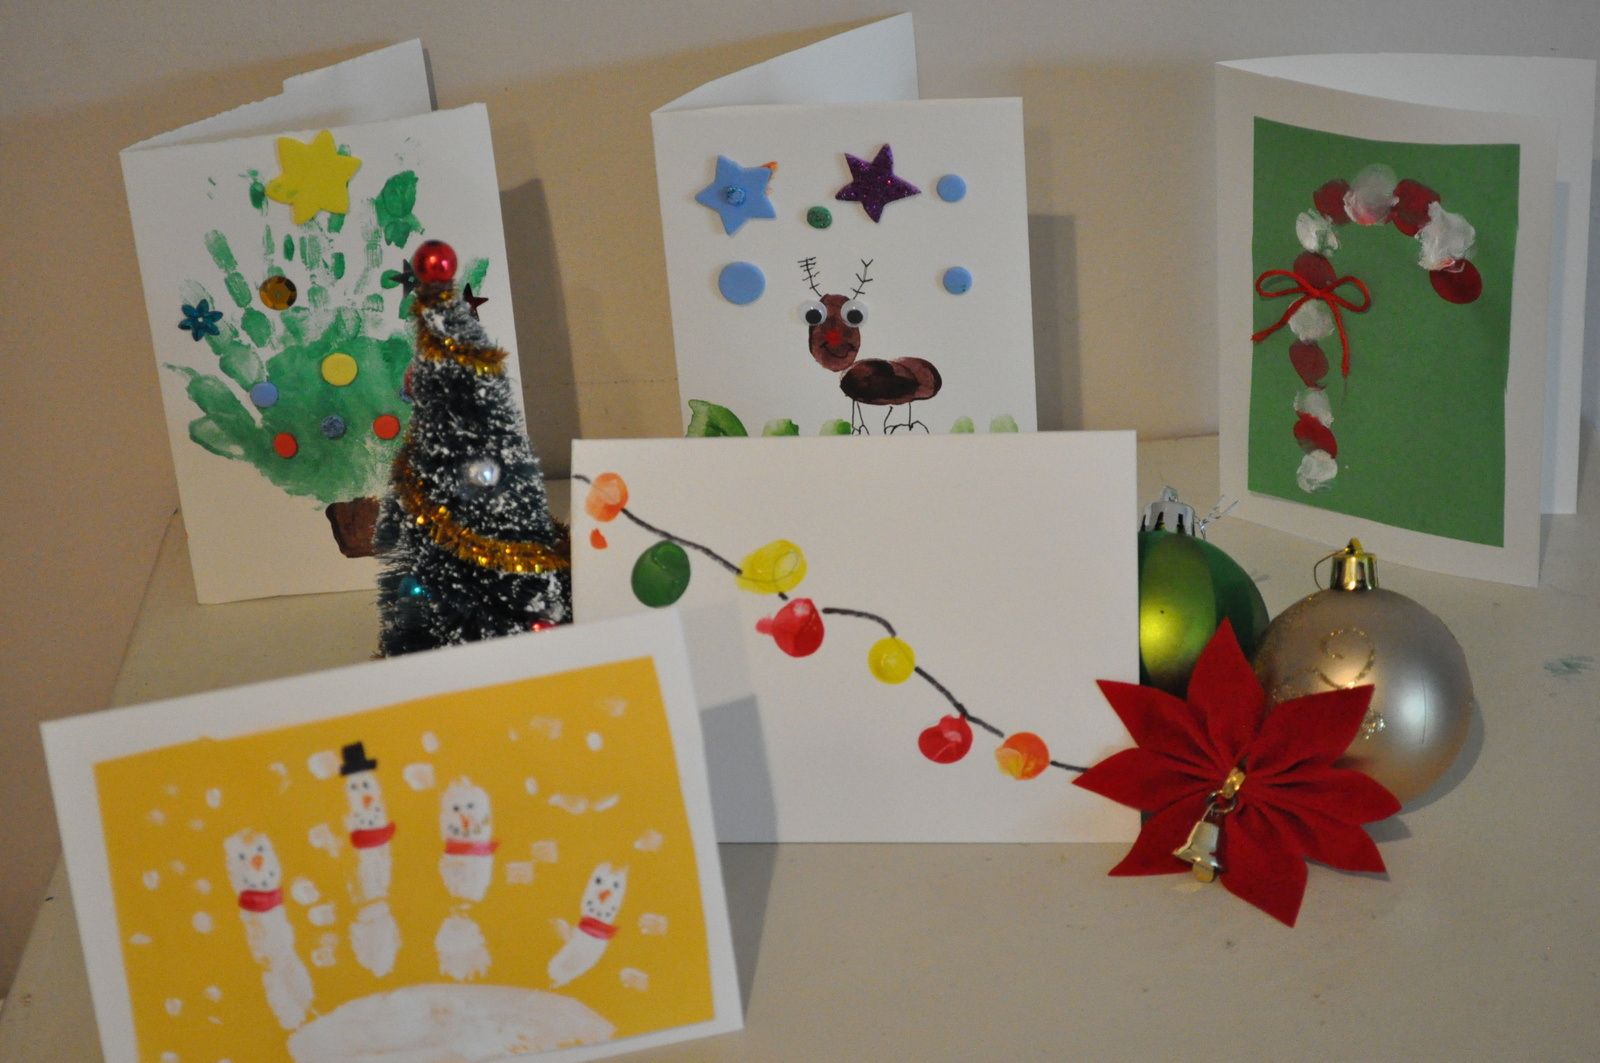 Finger Paint Birthday Card Ideas Homemade Christmas Card Ideas To Do With Kids Brisbane Kids